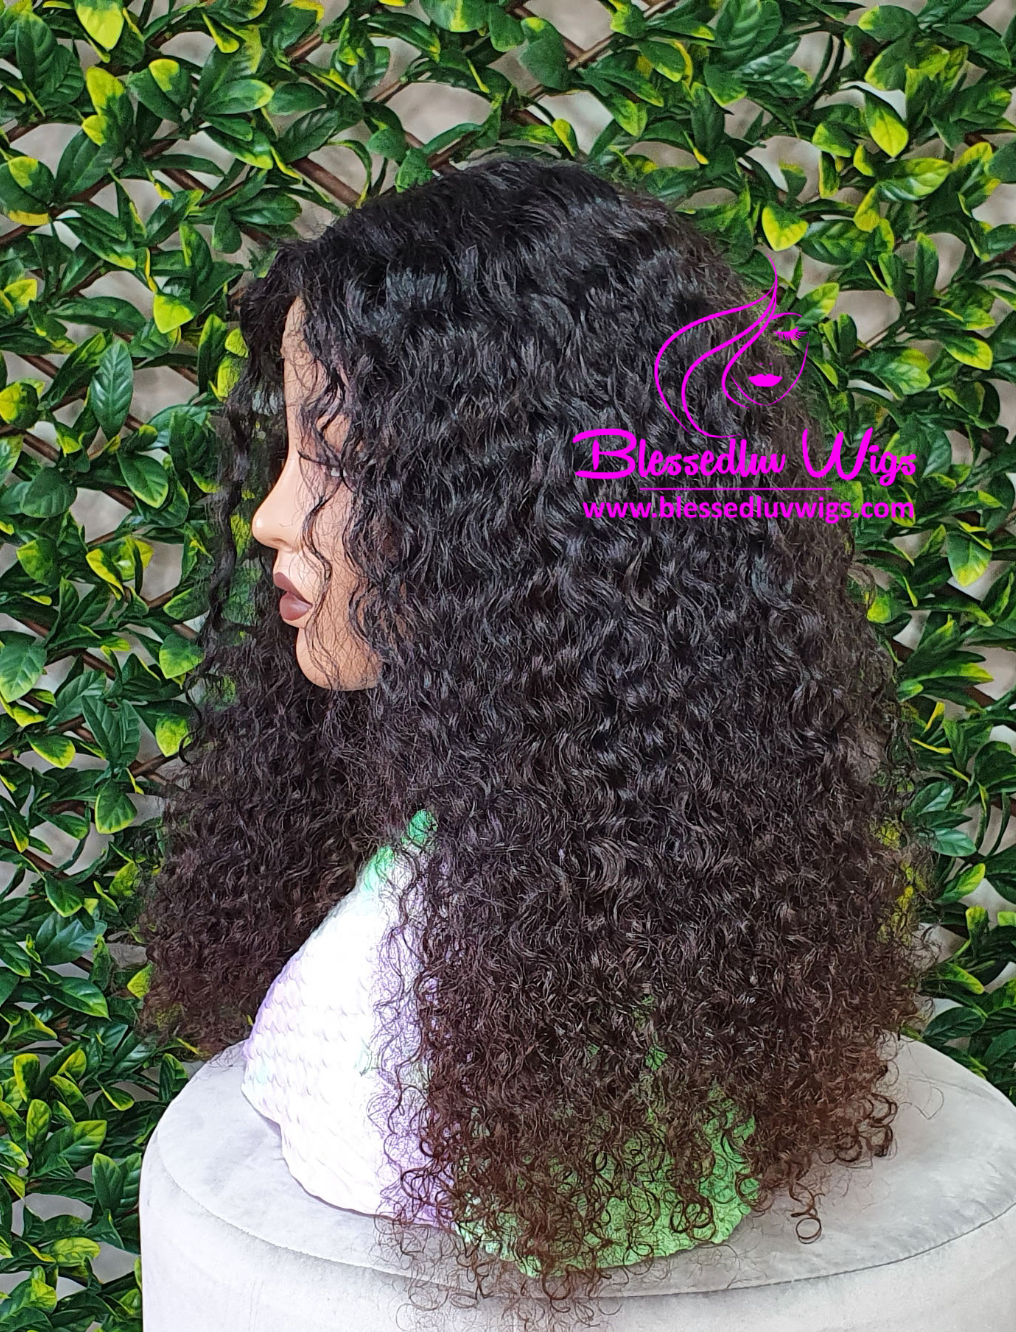 Natalia - Raw Blessedluv Curly Lace Closure Wig- Wig Lace has been Tinted-www.brazilianweave.com-Brazilianweave.com